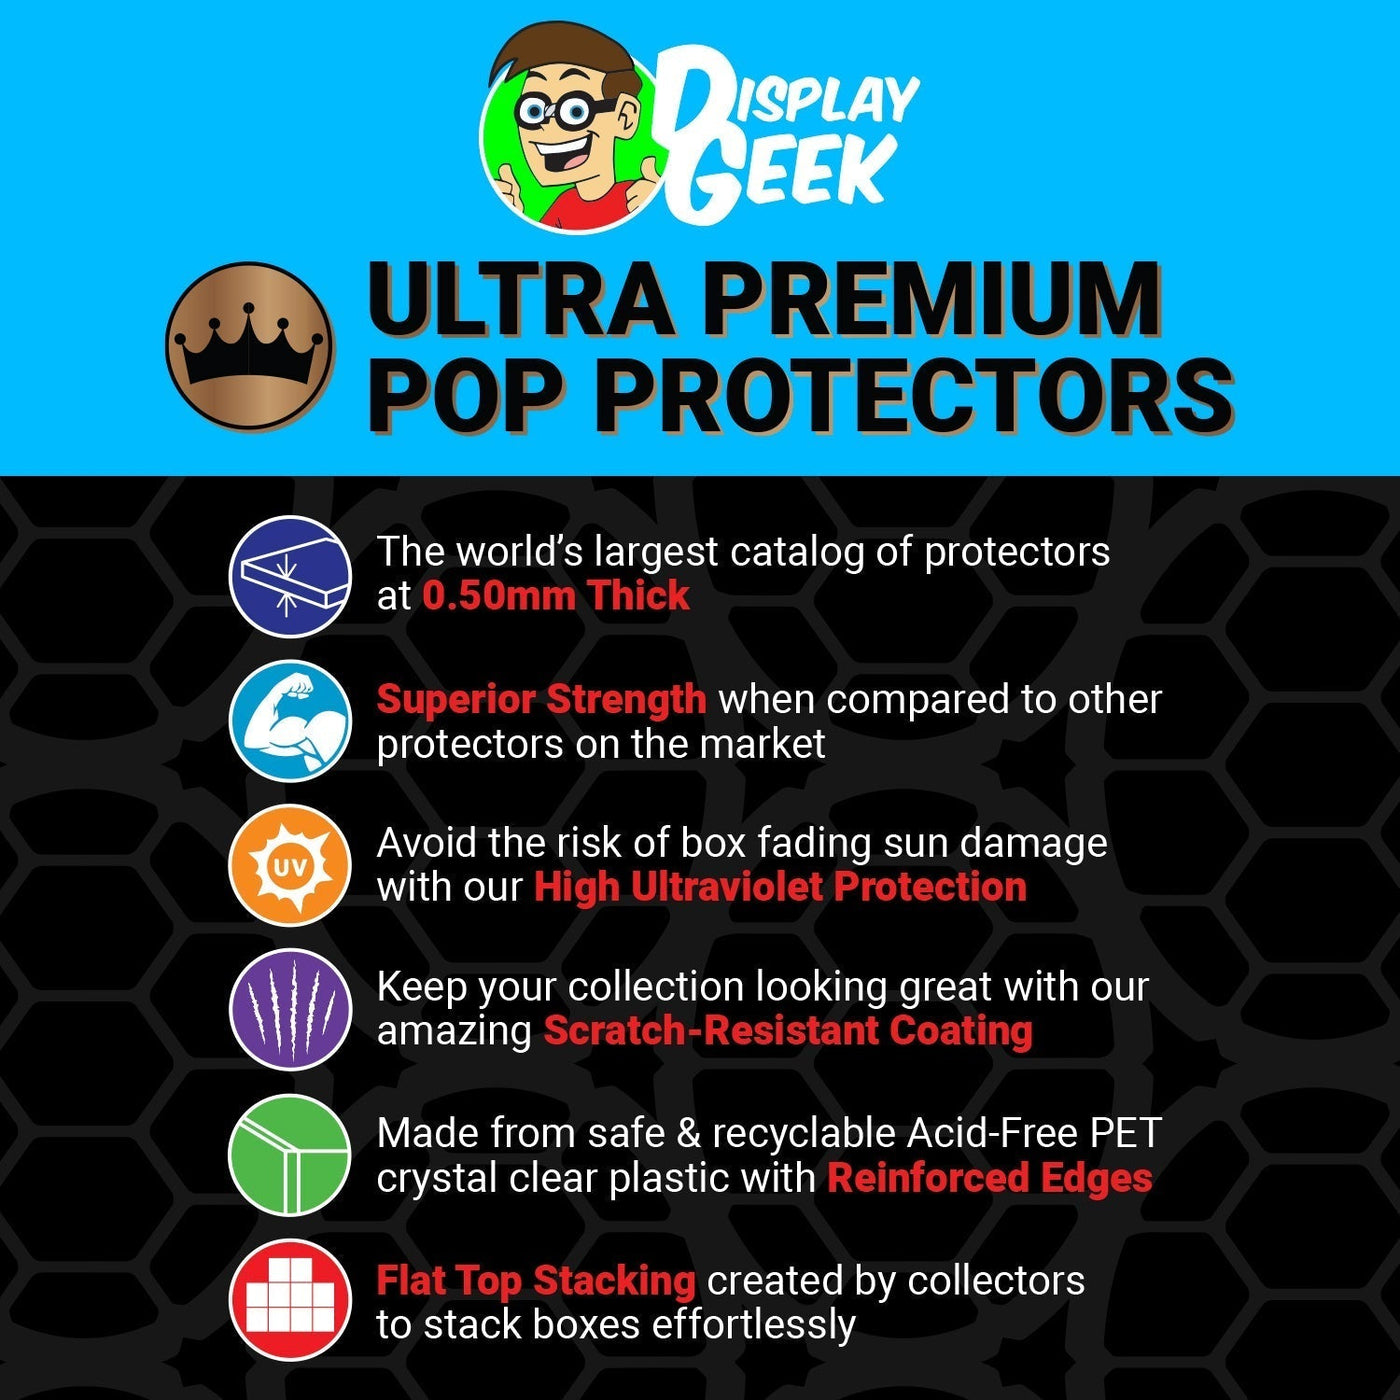 Pop Protector for 2 Pack The Wet Bandits Funko Pop on The Protector Guide App by Display Geek